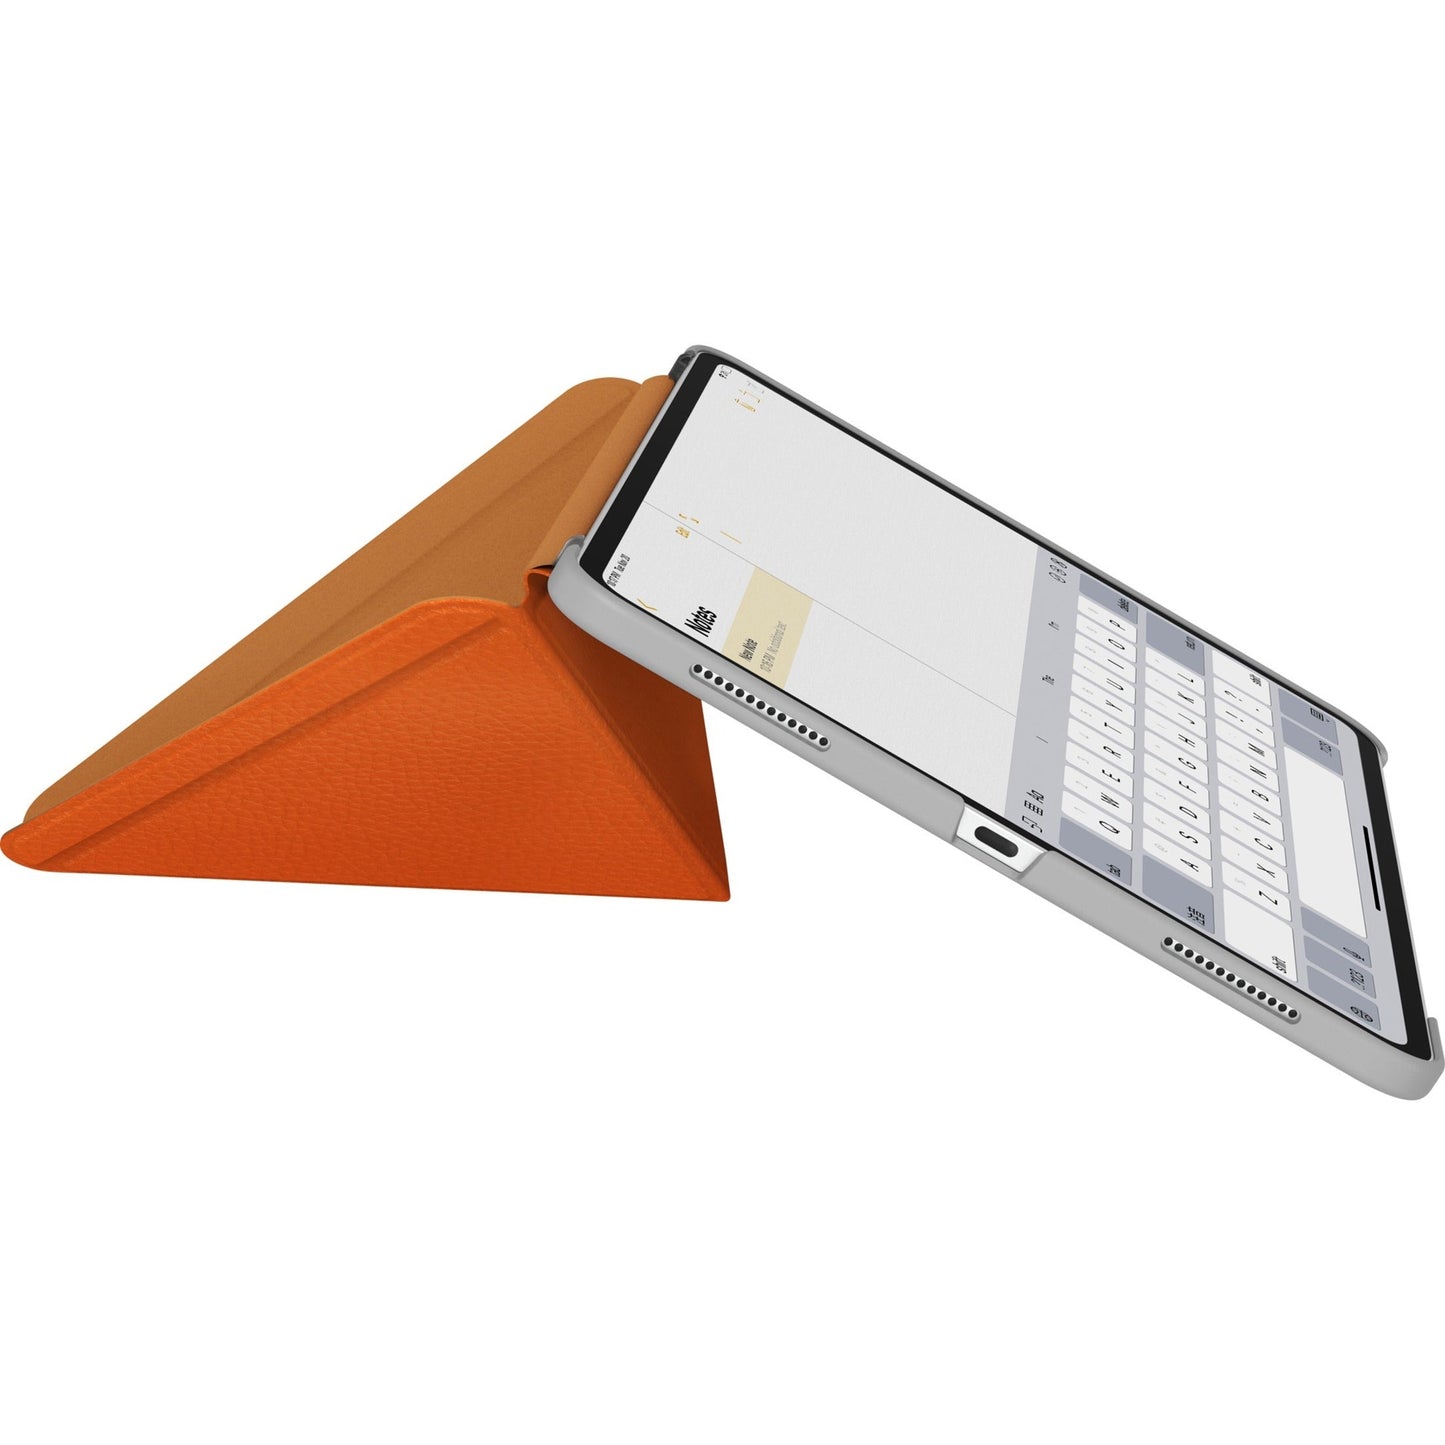 Moshi VersaCover Carrying Case for 11" Apple iPad Pro Tablet - Sienna Orange